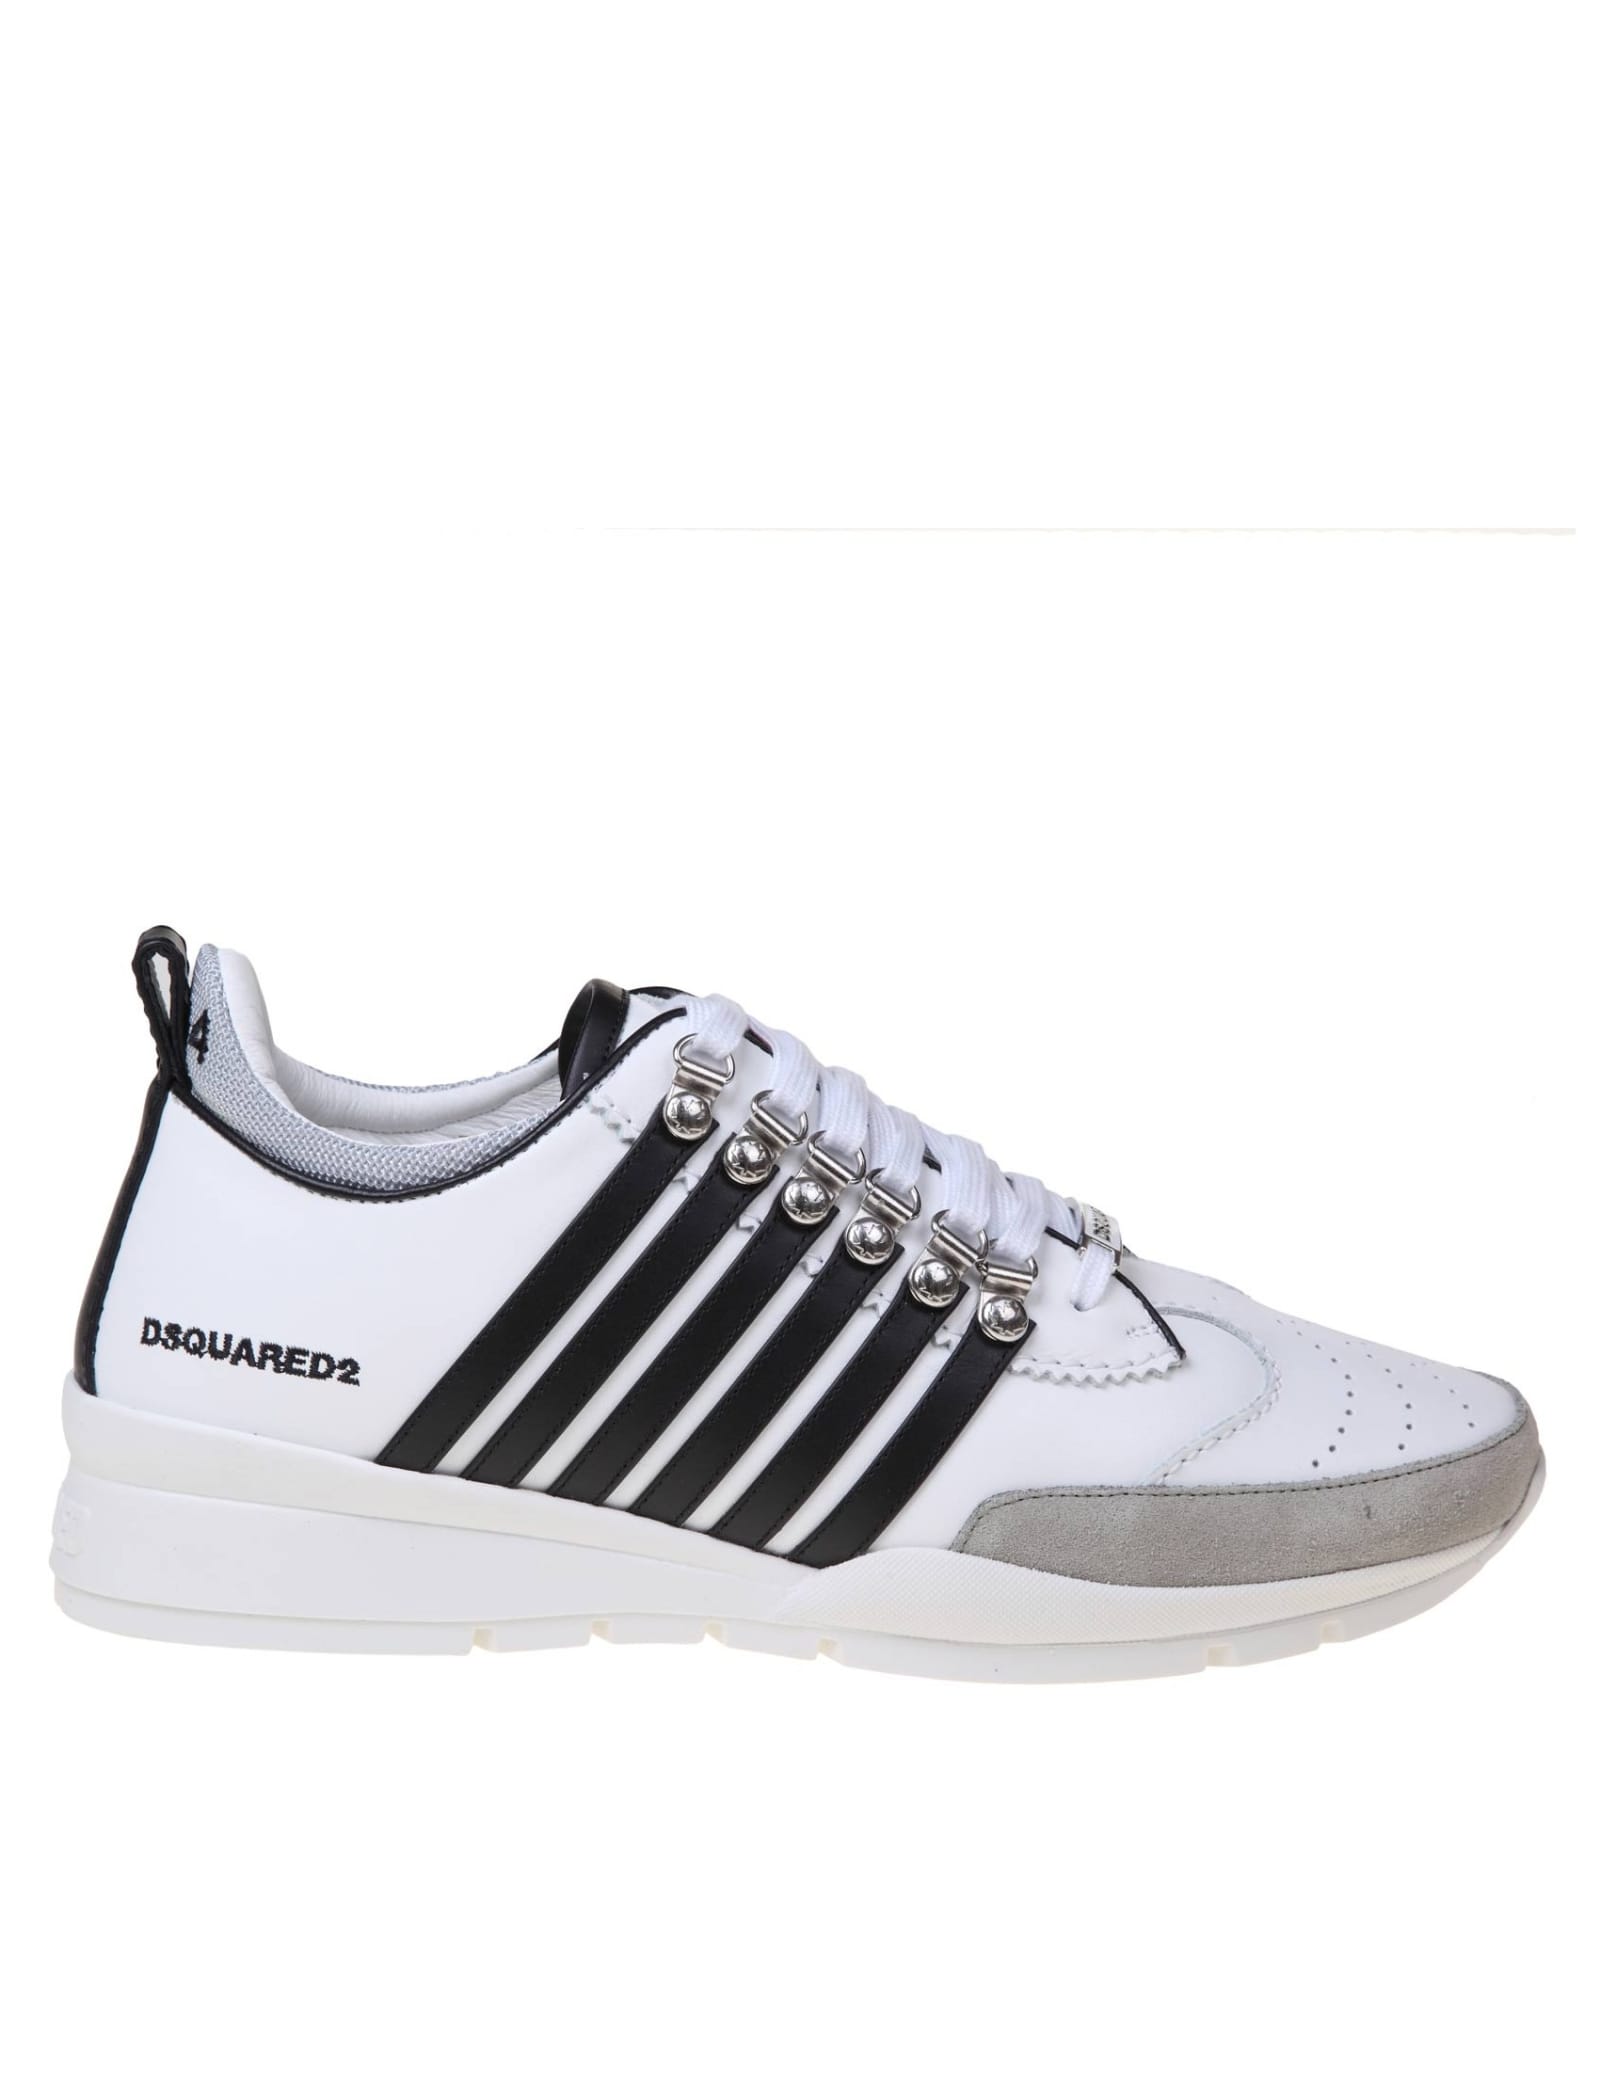 Shop Dsquared2 Legendary Sneakers In Black And White Leather In White/black